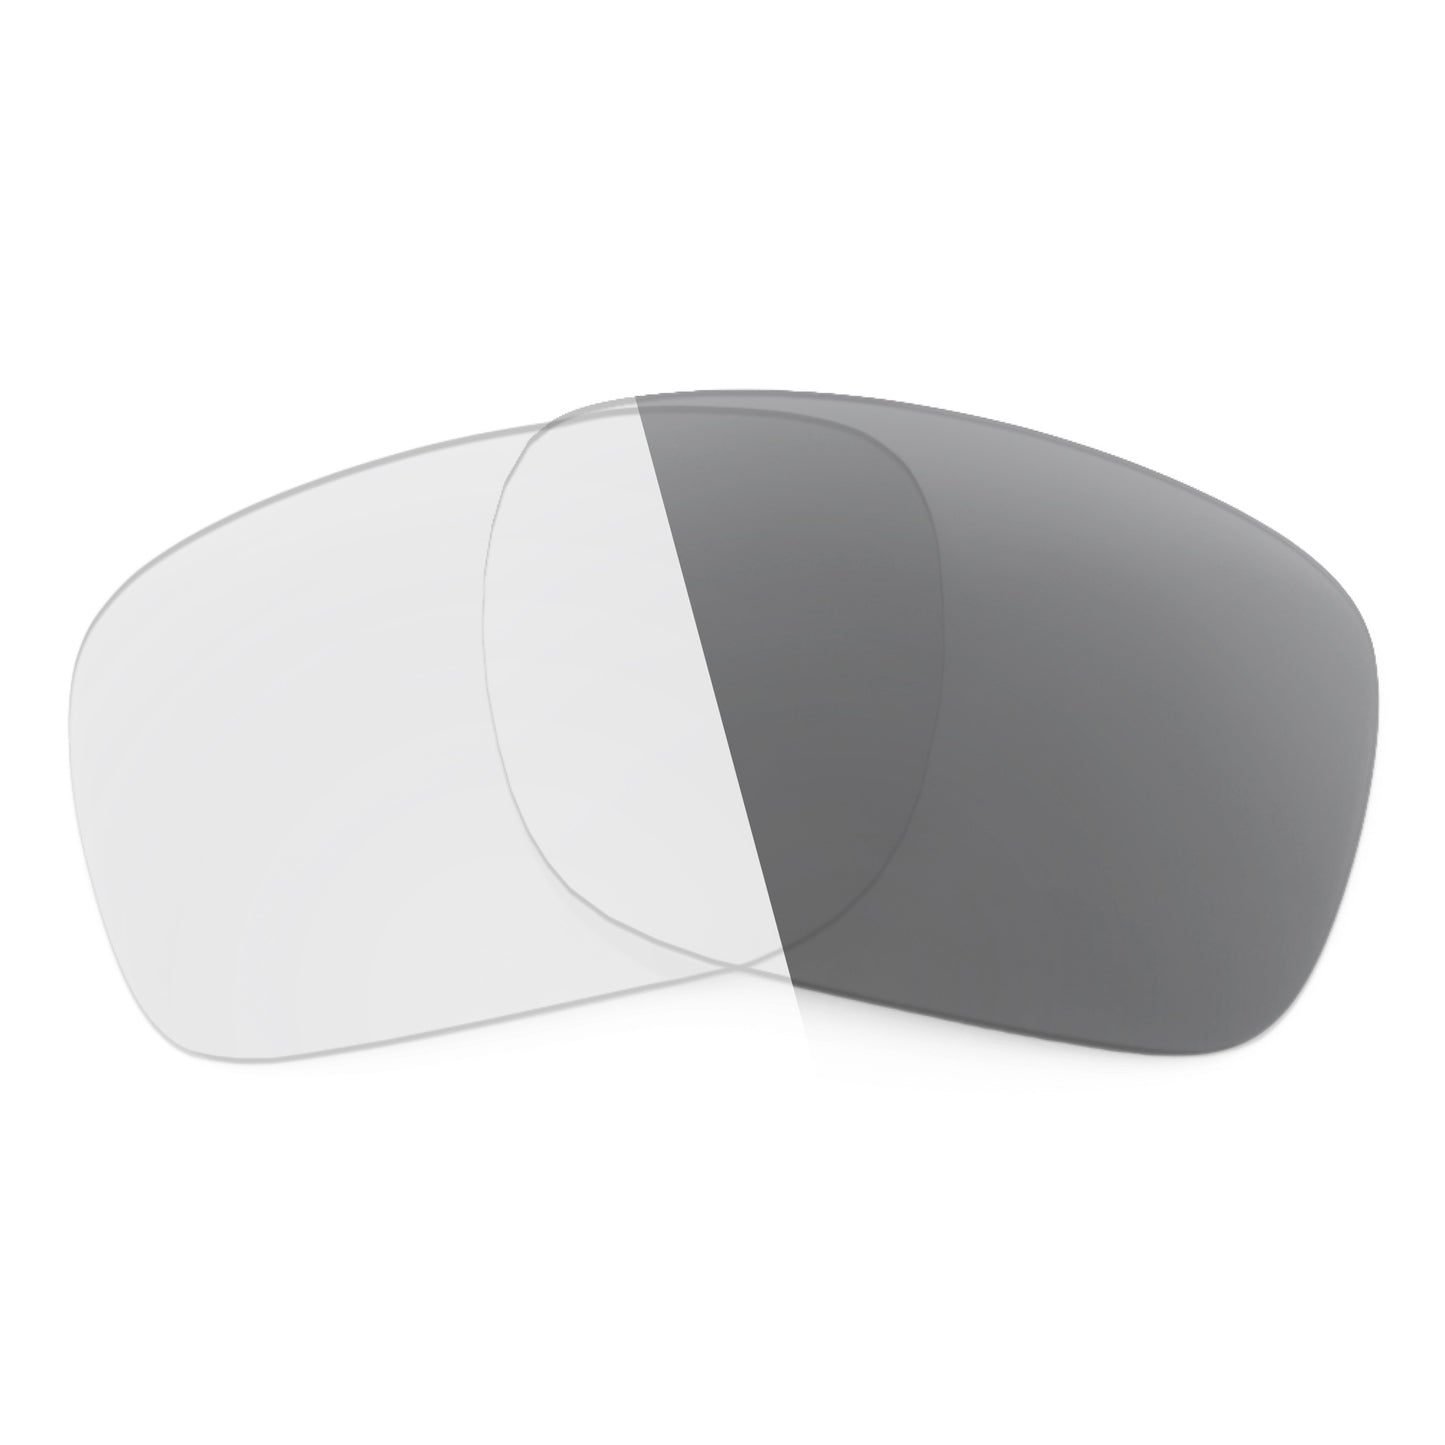 Revant replacement lenses for Ray-Ban RB4174 56mm Non-Polarized Adapt Gray Photochromic